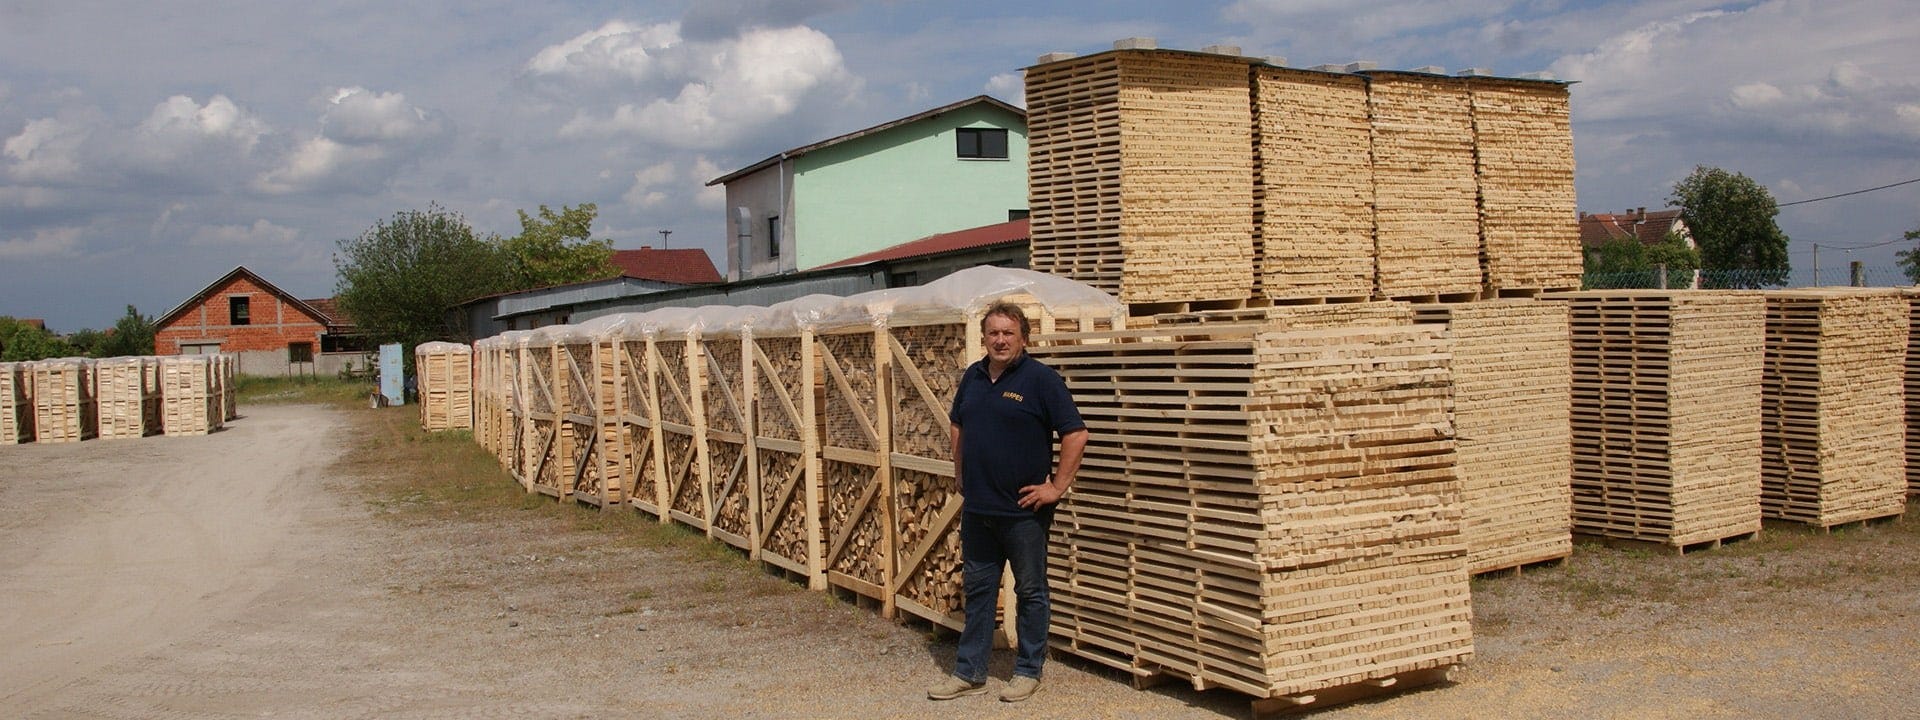 Goran Margetic, an owner of Marpes pallet producer from Croatia